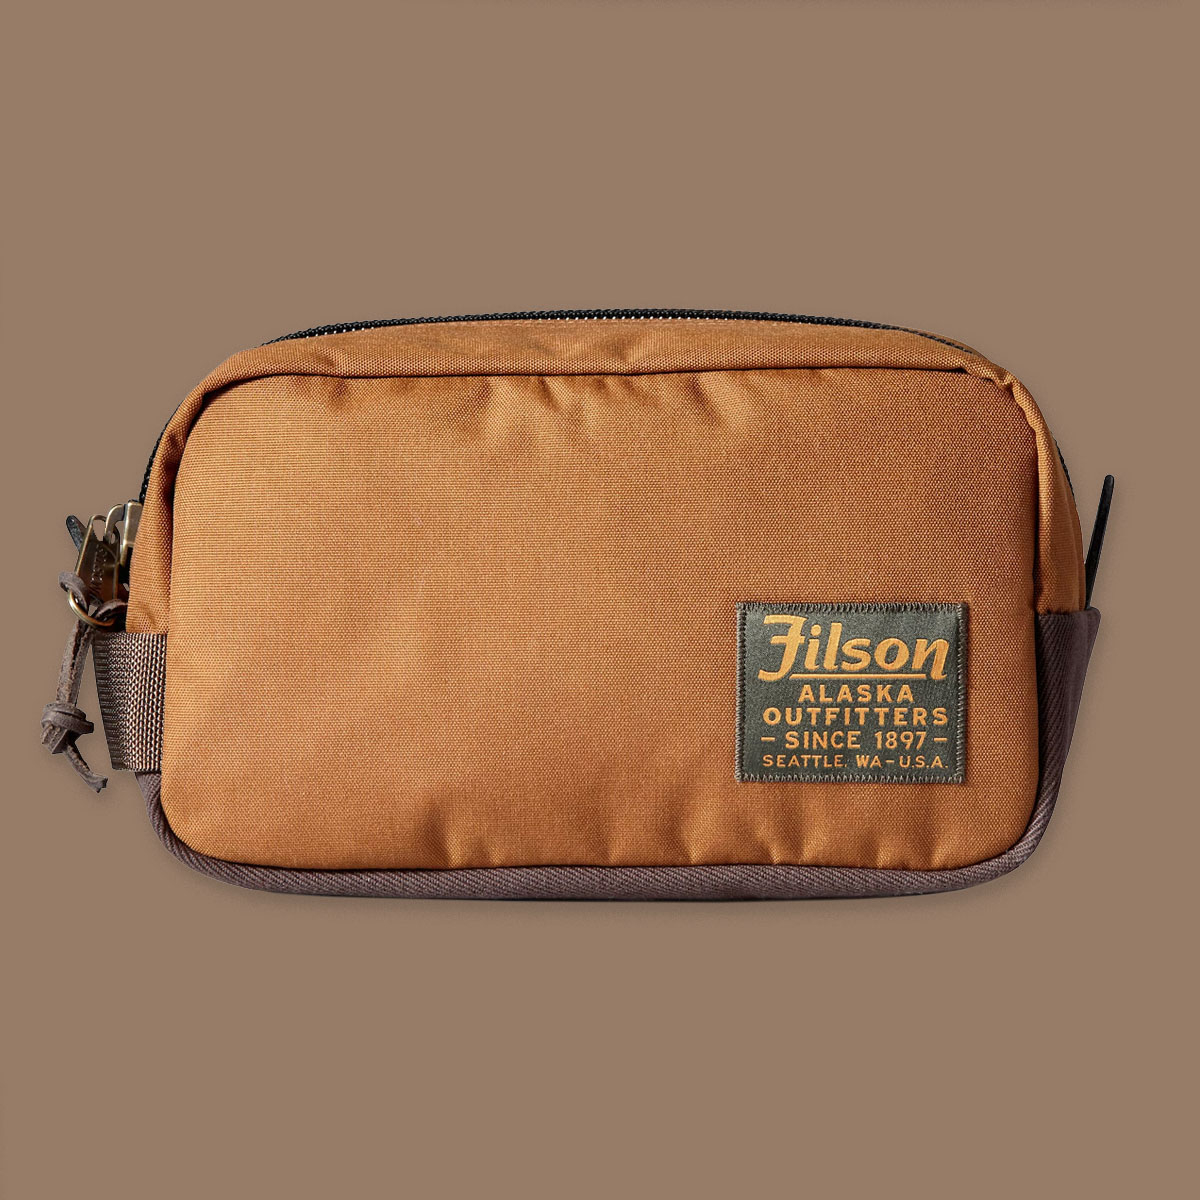 Filson Travel Pack Whiskey, made of tear-resistant ballistic nylon and reinforced with Filson's famous Rugged Twill